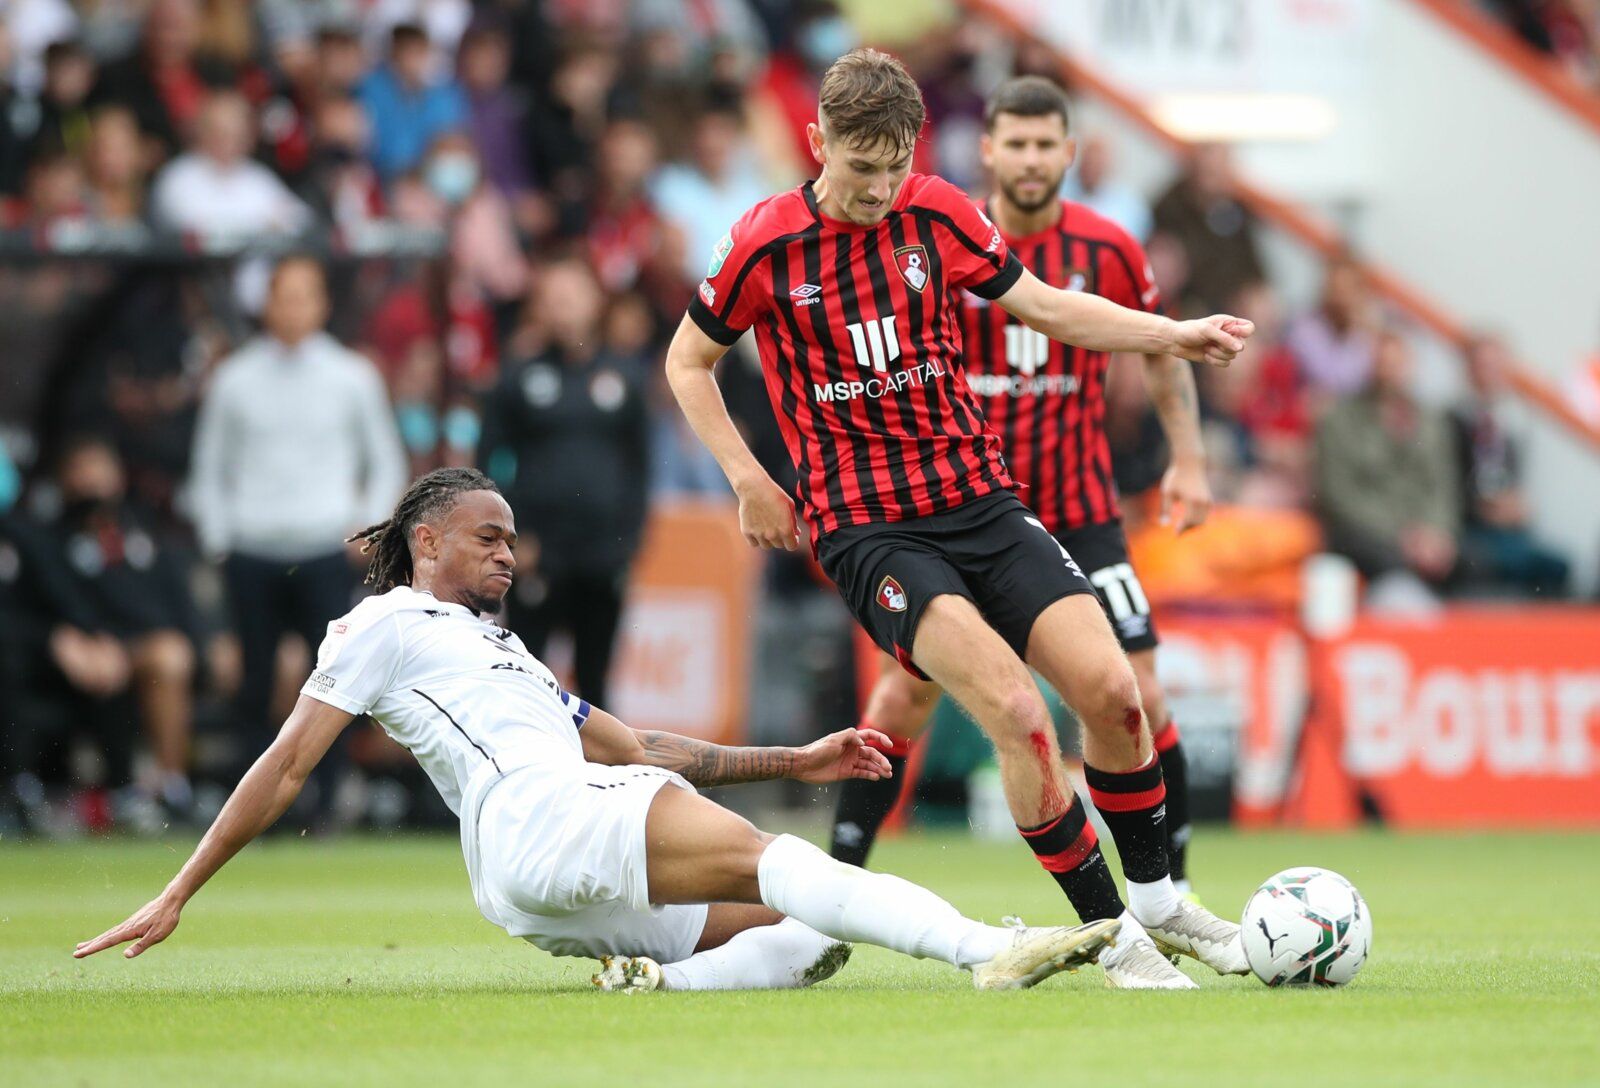 Soccer Football - Carabao Cup First Round - AFC Bournemouth v Milton Keynes Dons - Vitality Stadium, Bournemouth, Britain - July 31, 2021  AFC Bournemouth's David Brooks in action with Milton Keynes Dons' David Kasumu Action Images/Peter Cziborra